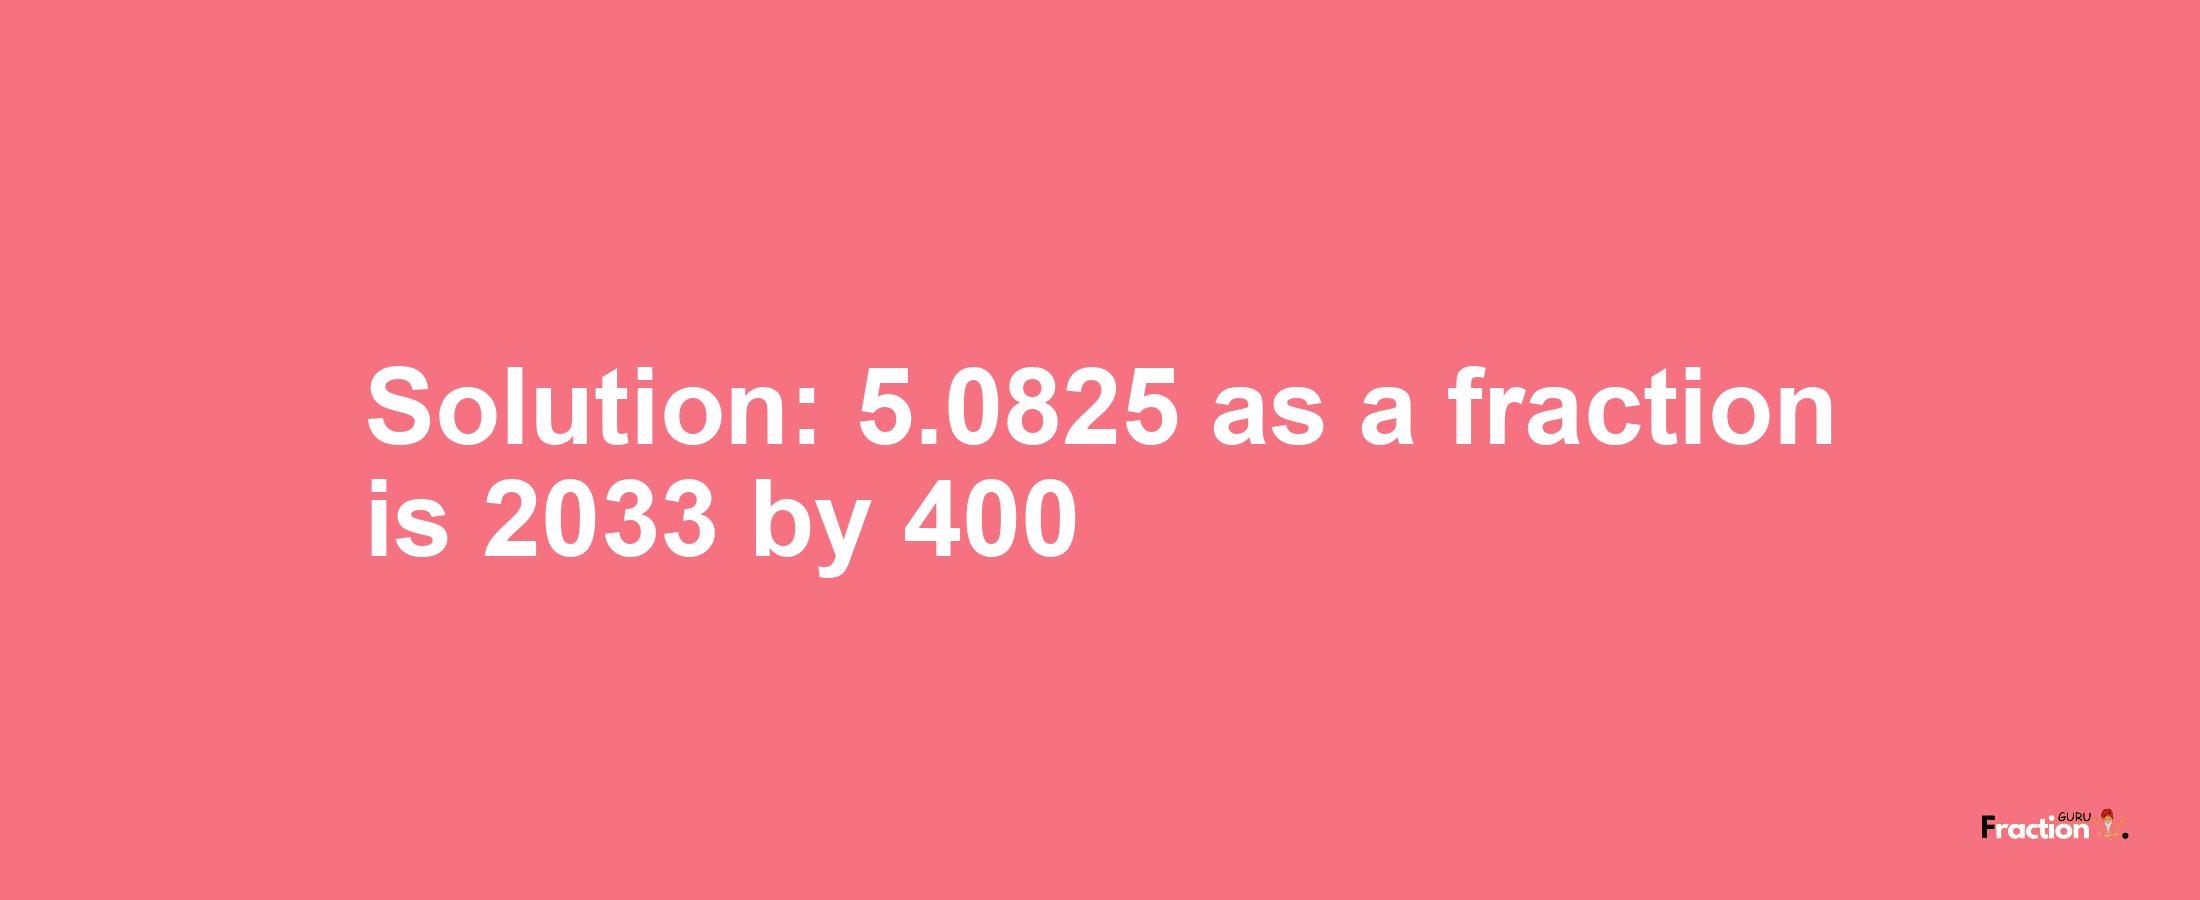 Solution:5.0825 as a fraction is 2033/400